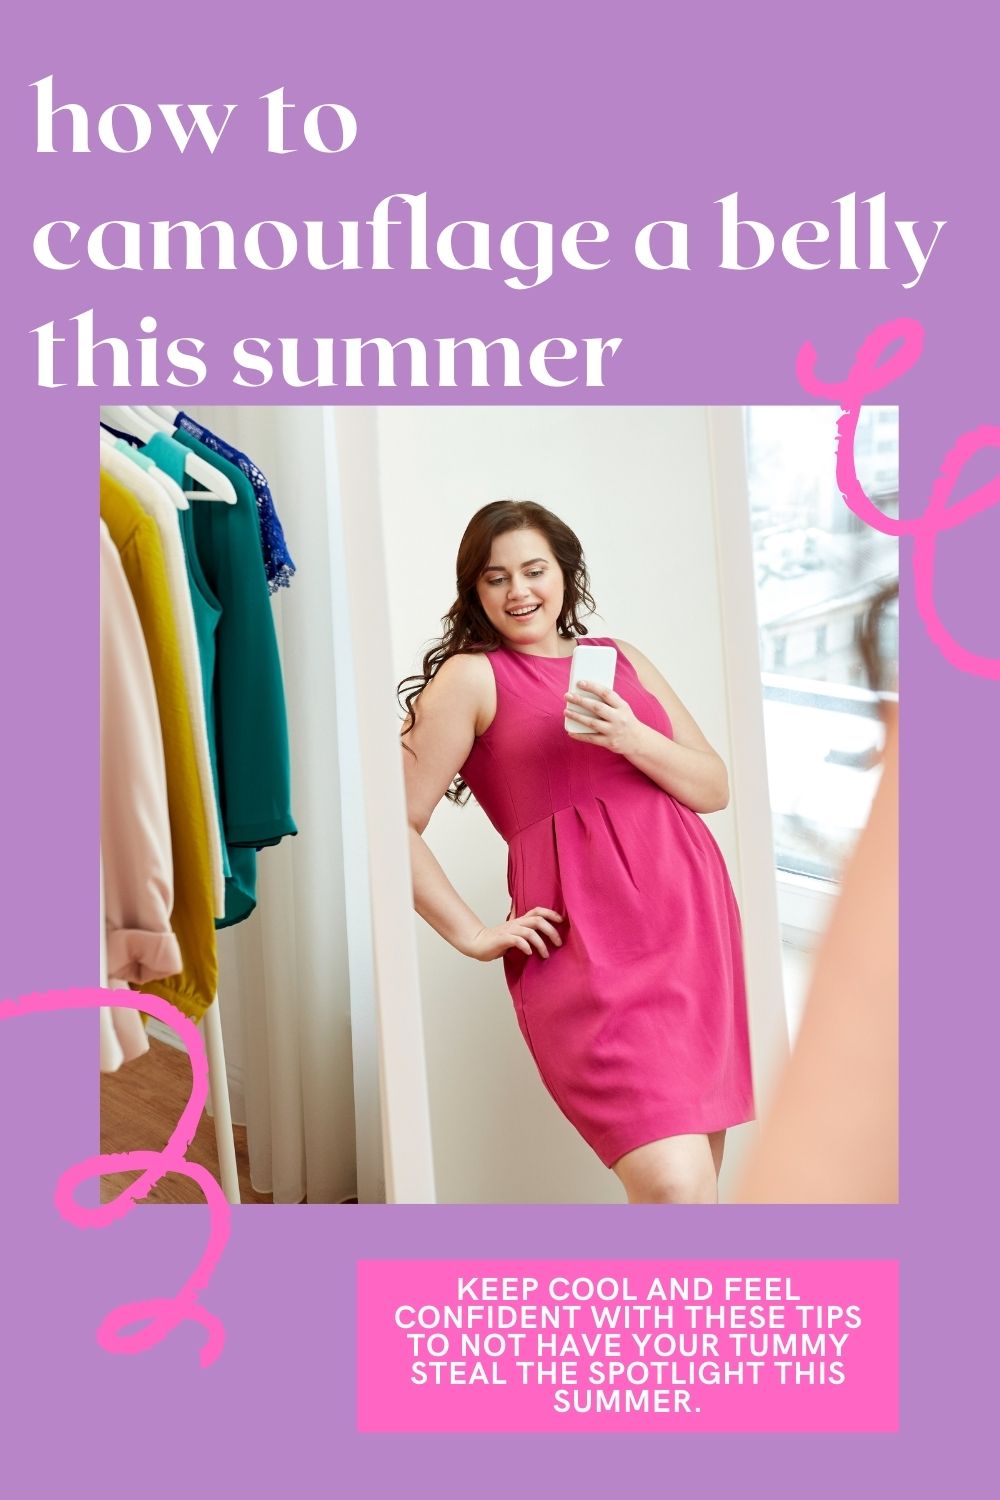 How to Disguise a Belly in the Summer: 5 Steps to Feeling More Confident and Looking Your Best